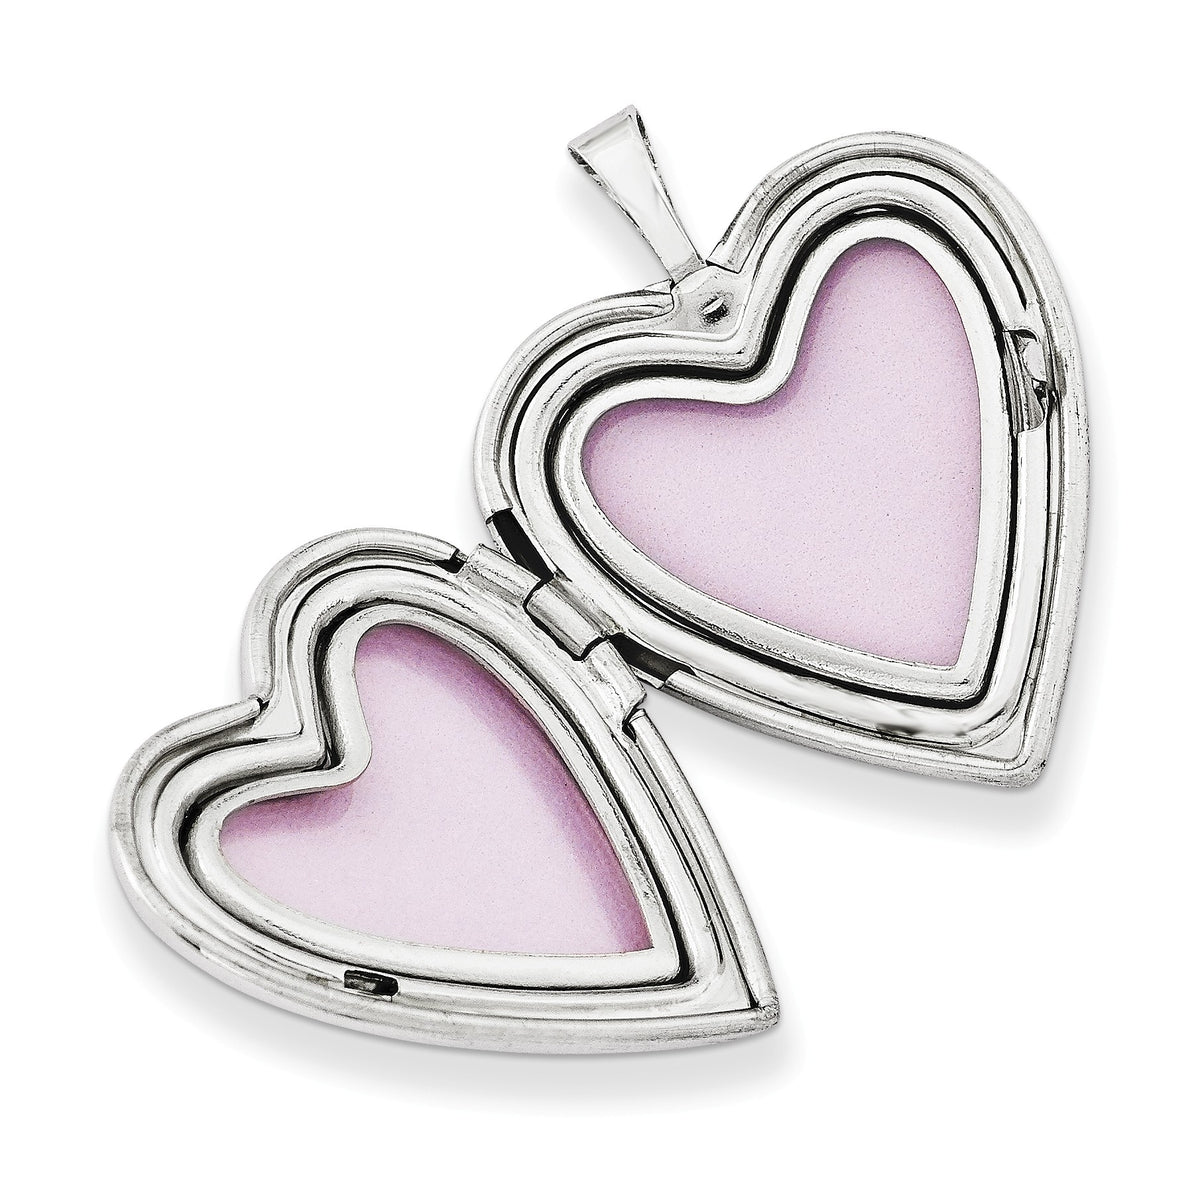 Alternate view of the 14k White Gold and Enamel 20mm I Love You Rose Heart Locket by The Black Bow Jewelry Co.